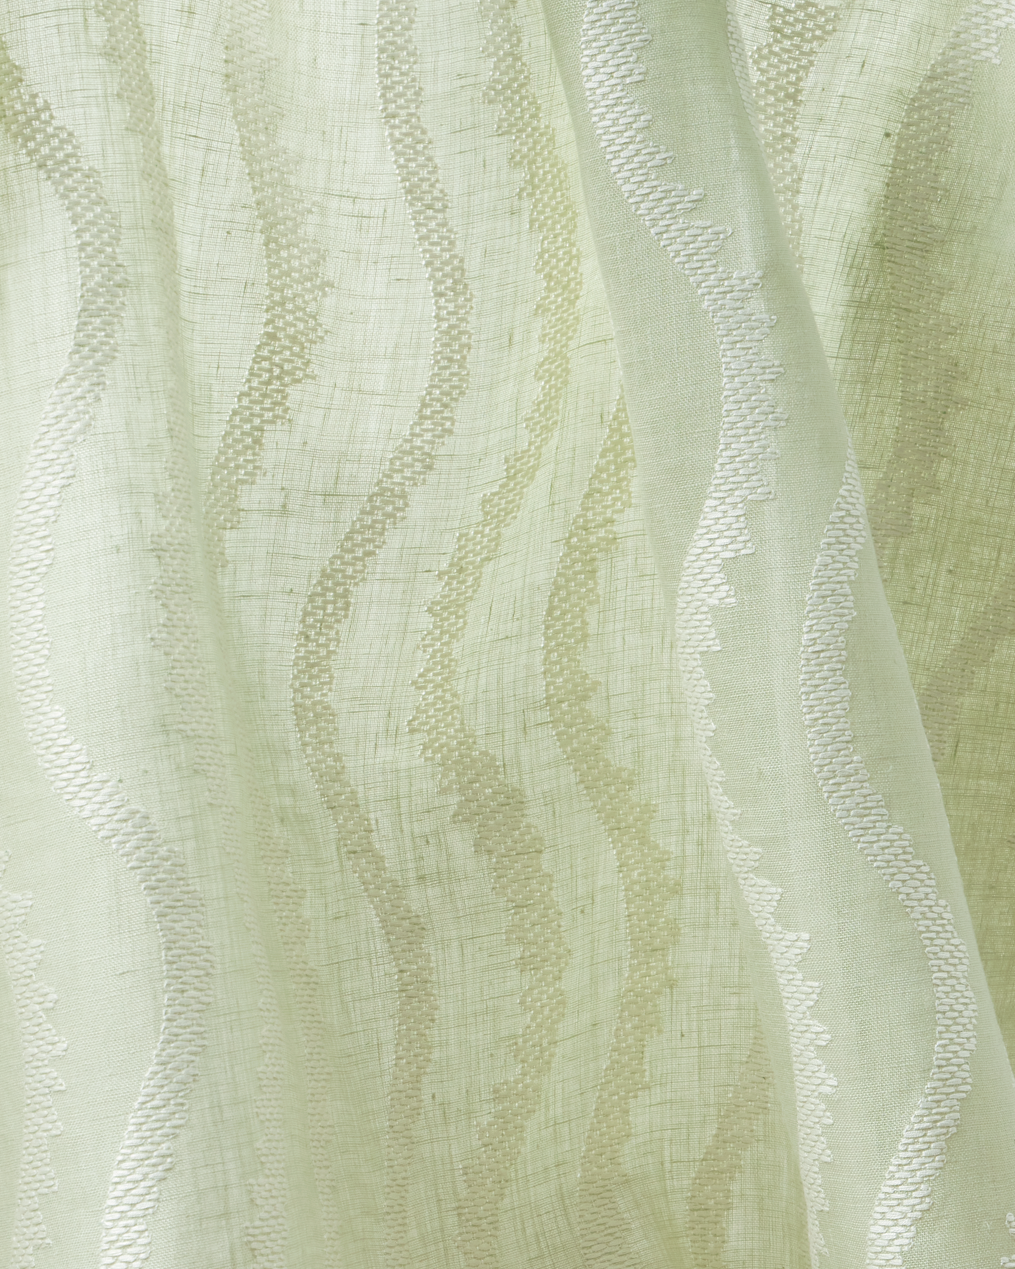 Notched Vines Sheer Fabric in Pistachio